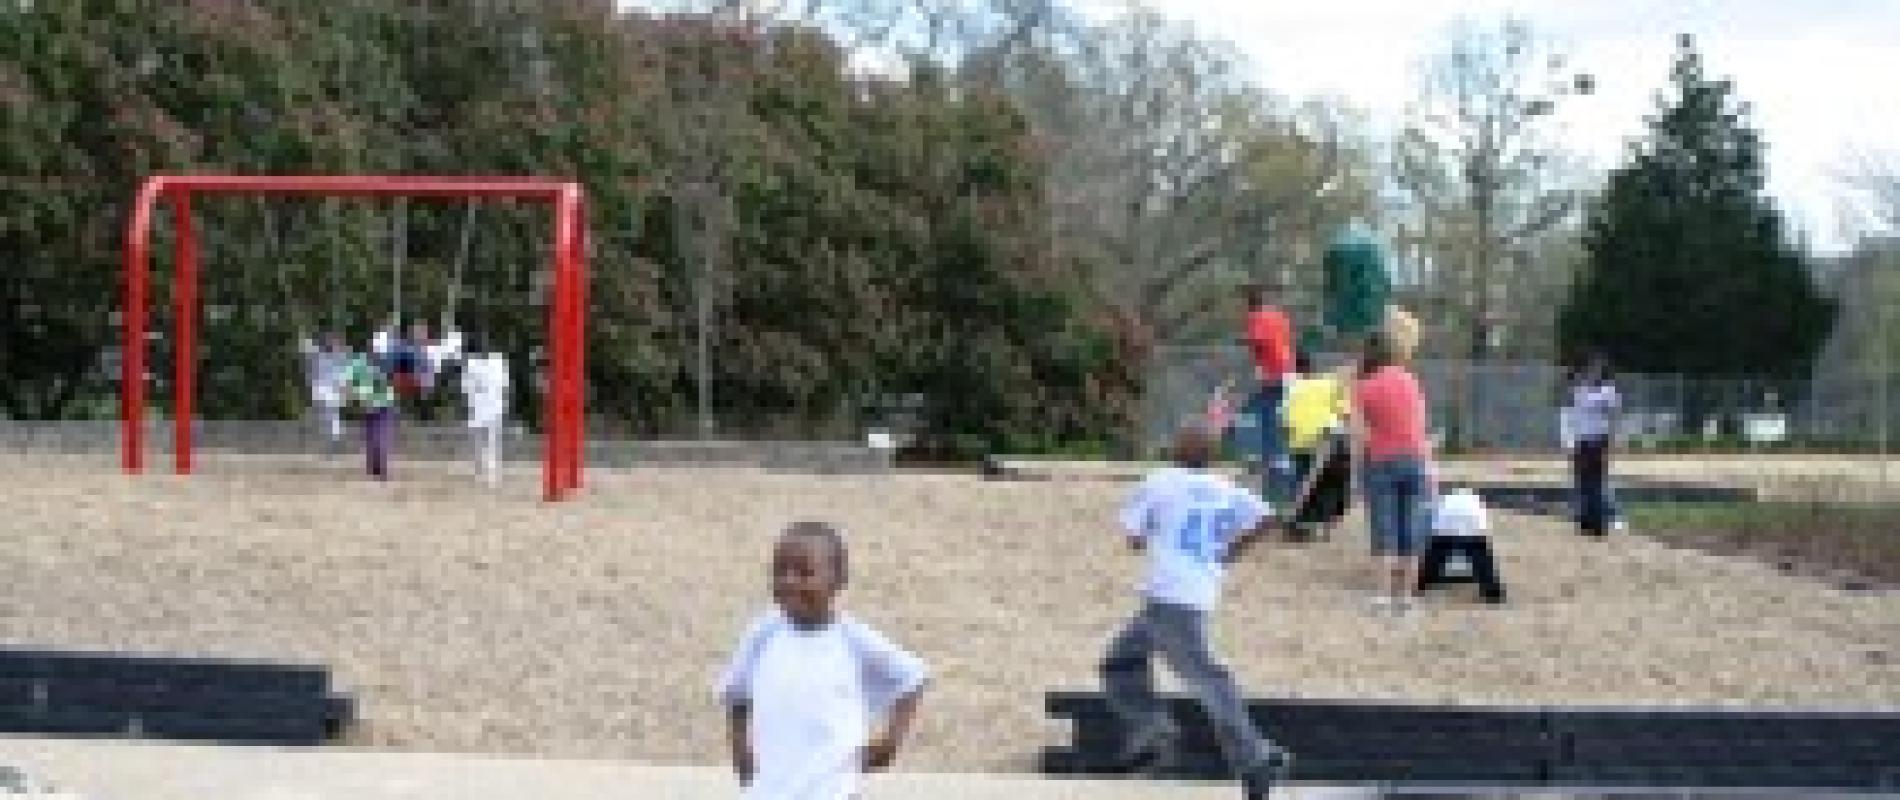 Kids Playing at the Park